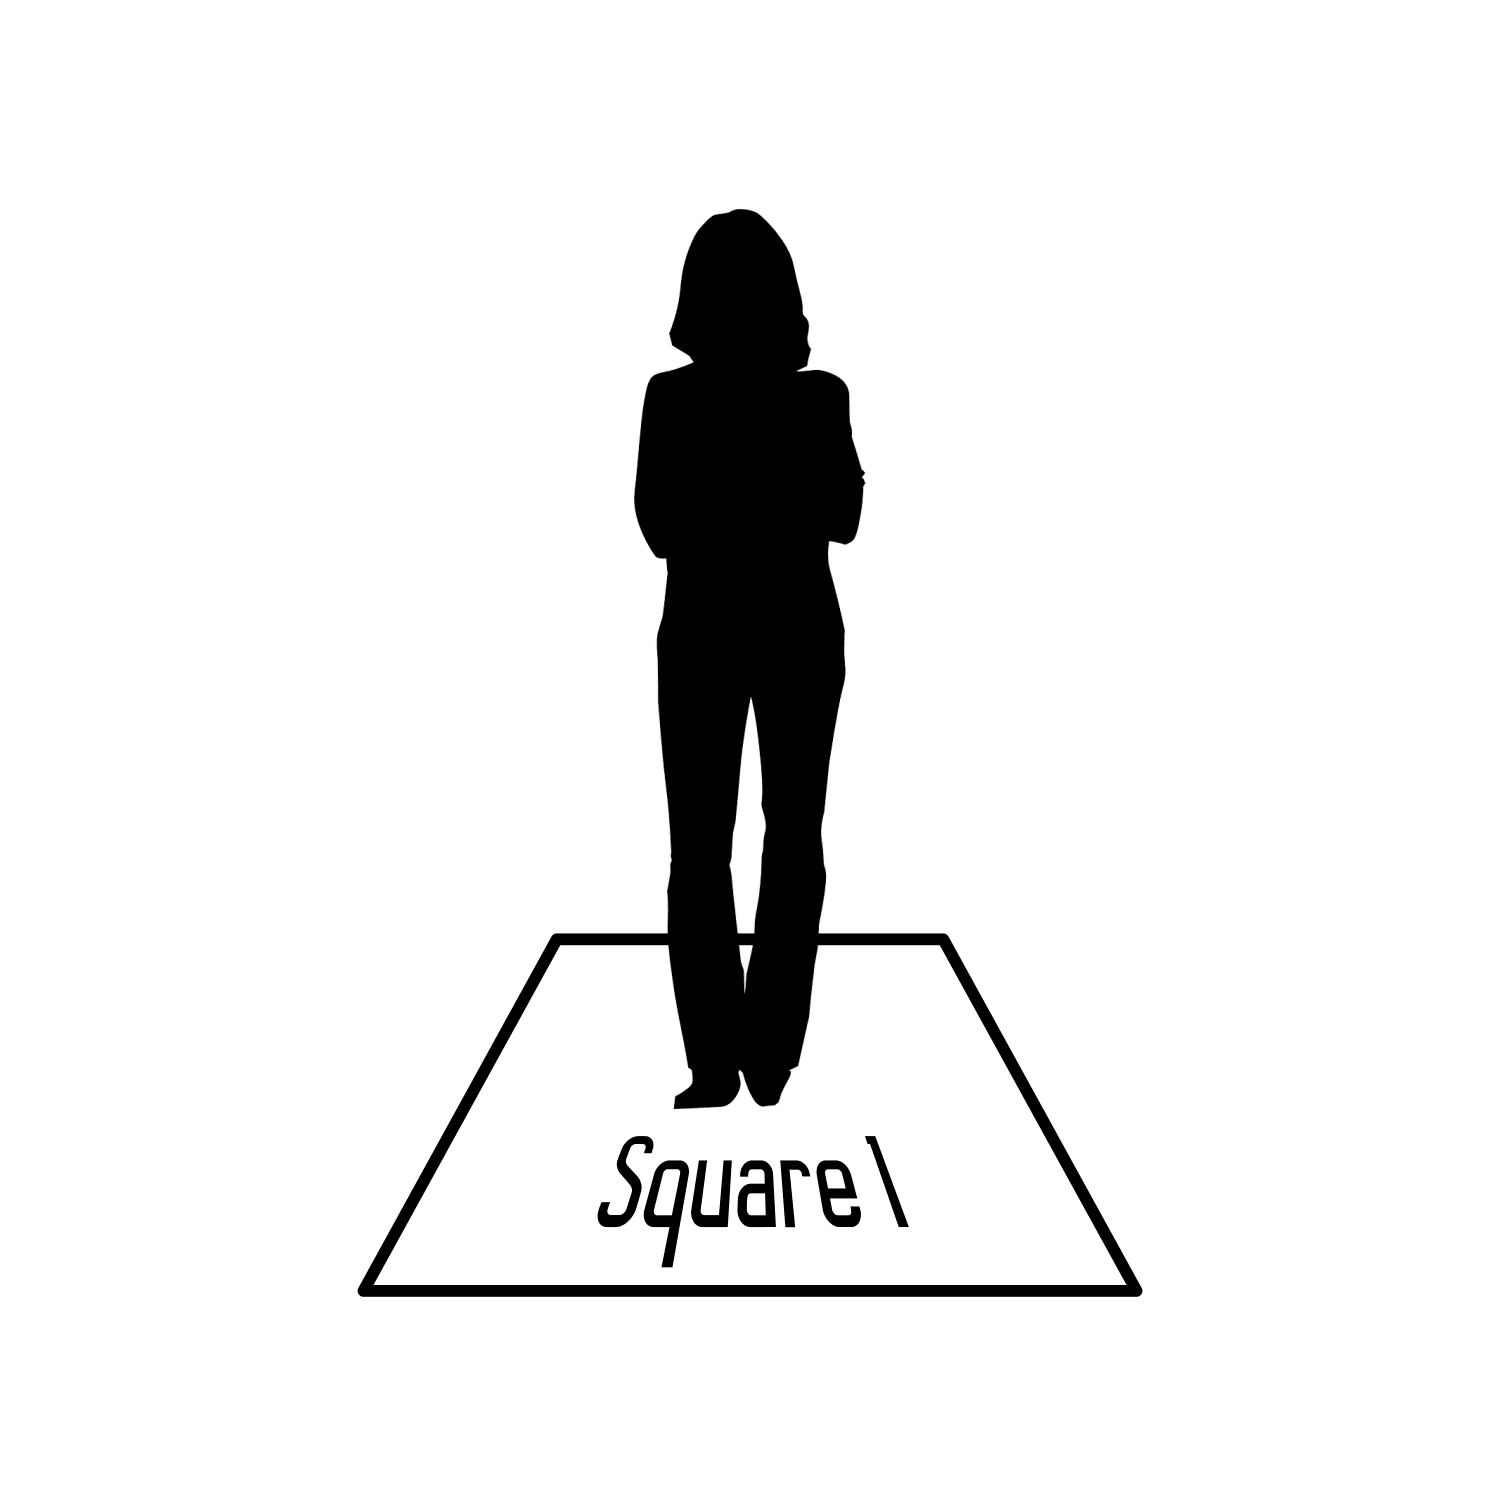 Square One Image